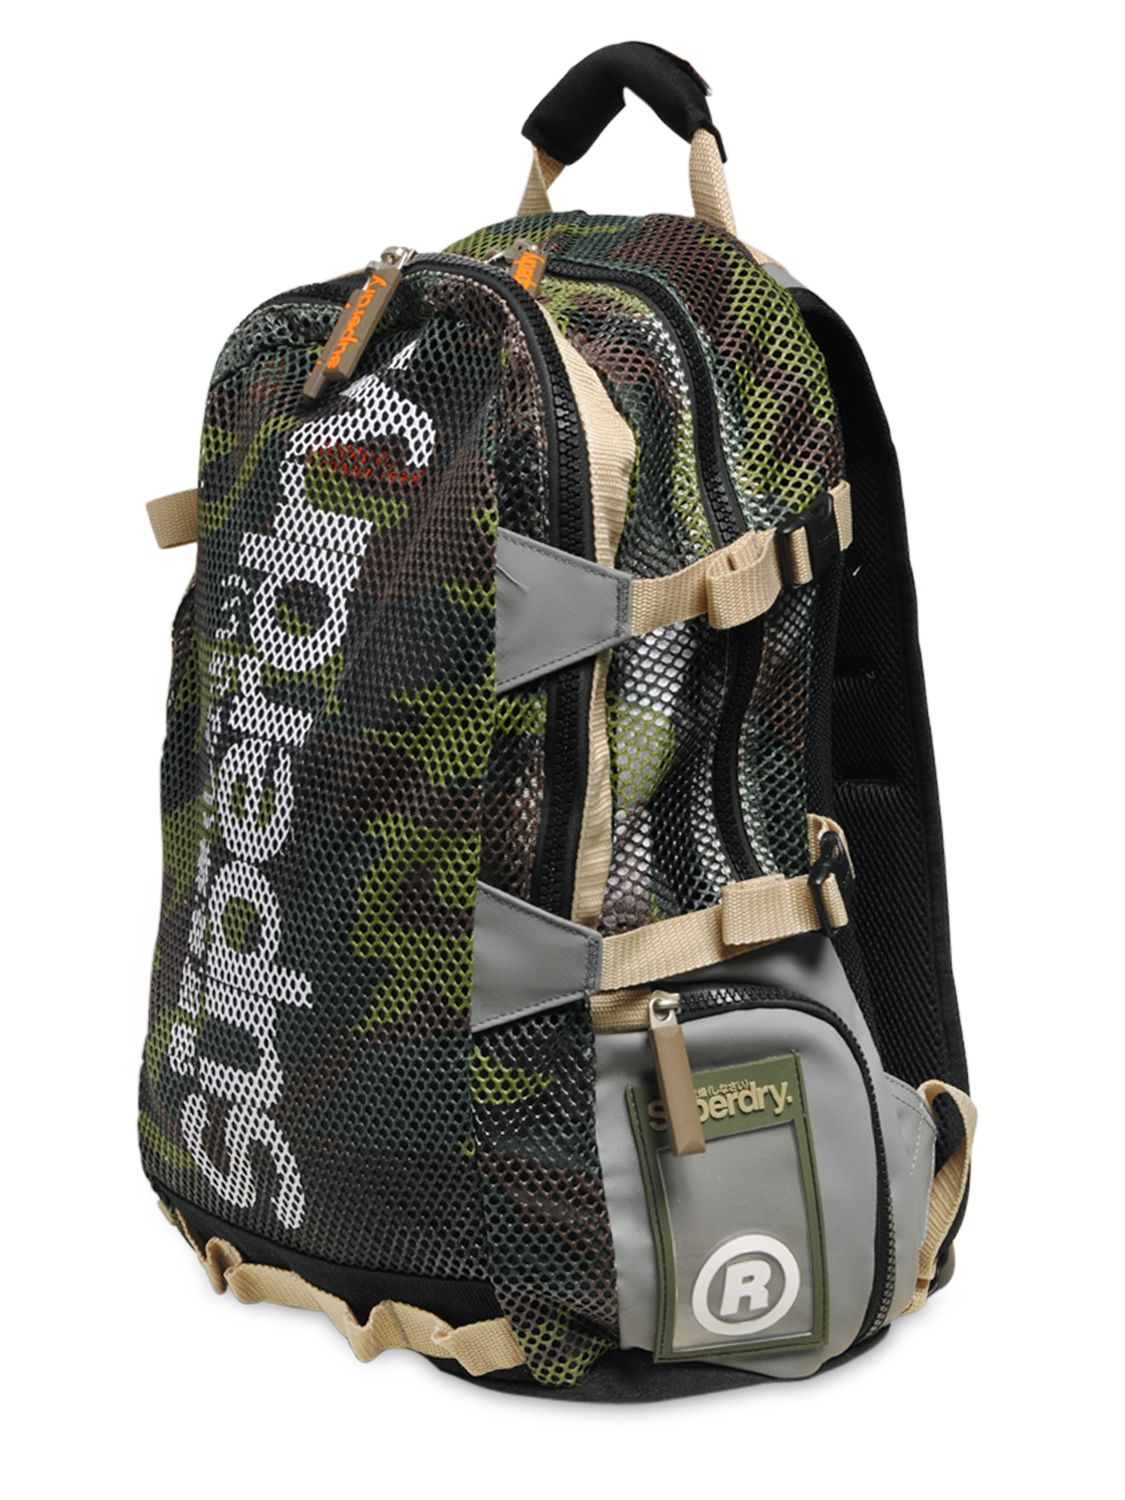 Superdry Camouflage Mesh Tarp Backpack in Green for Men - Lyst